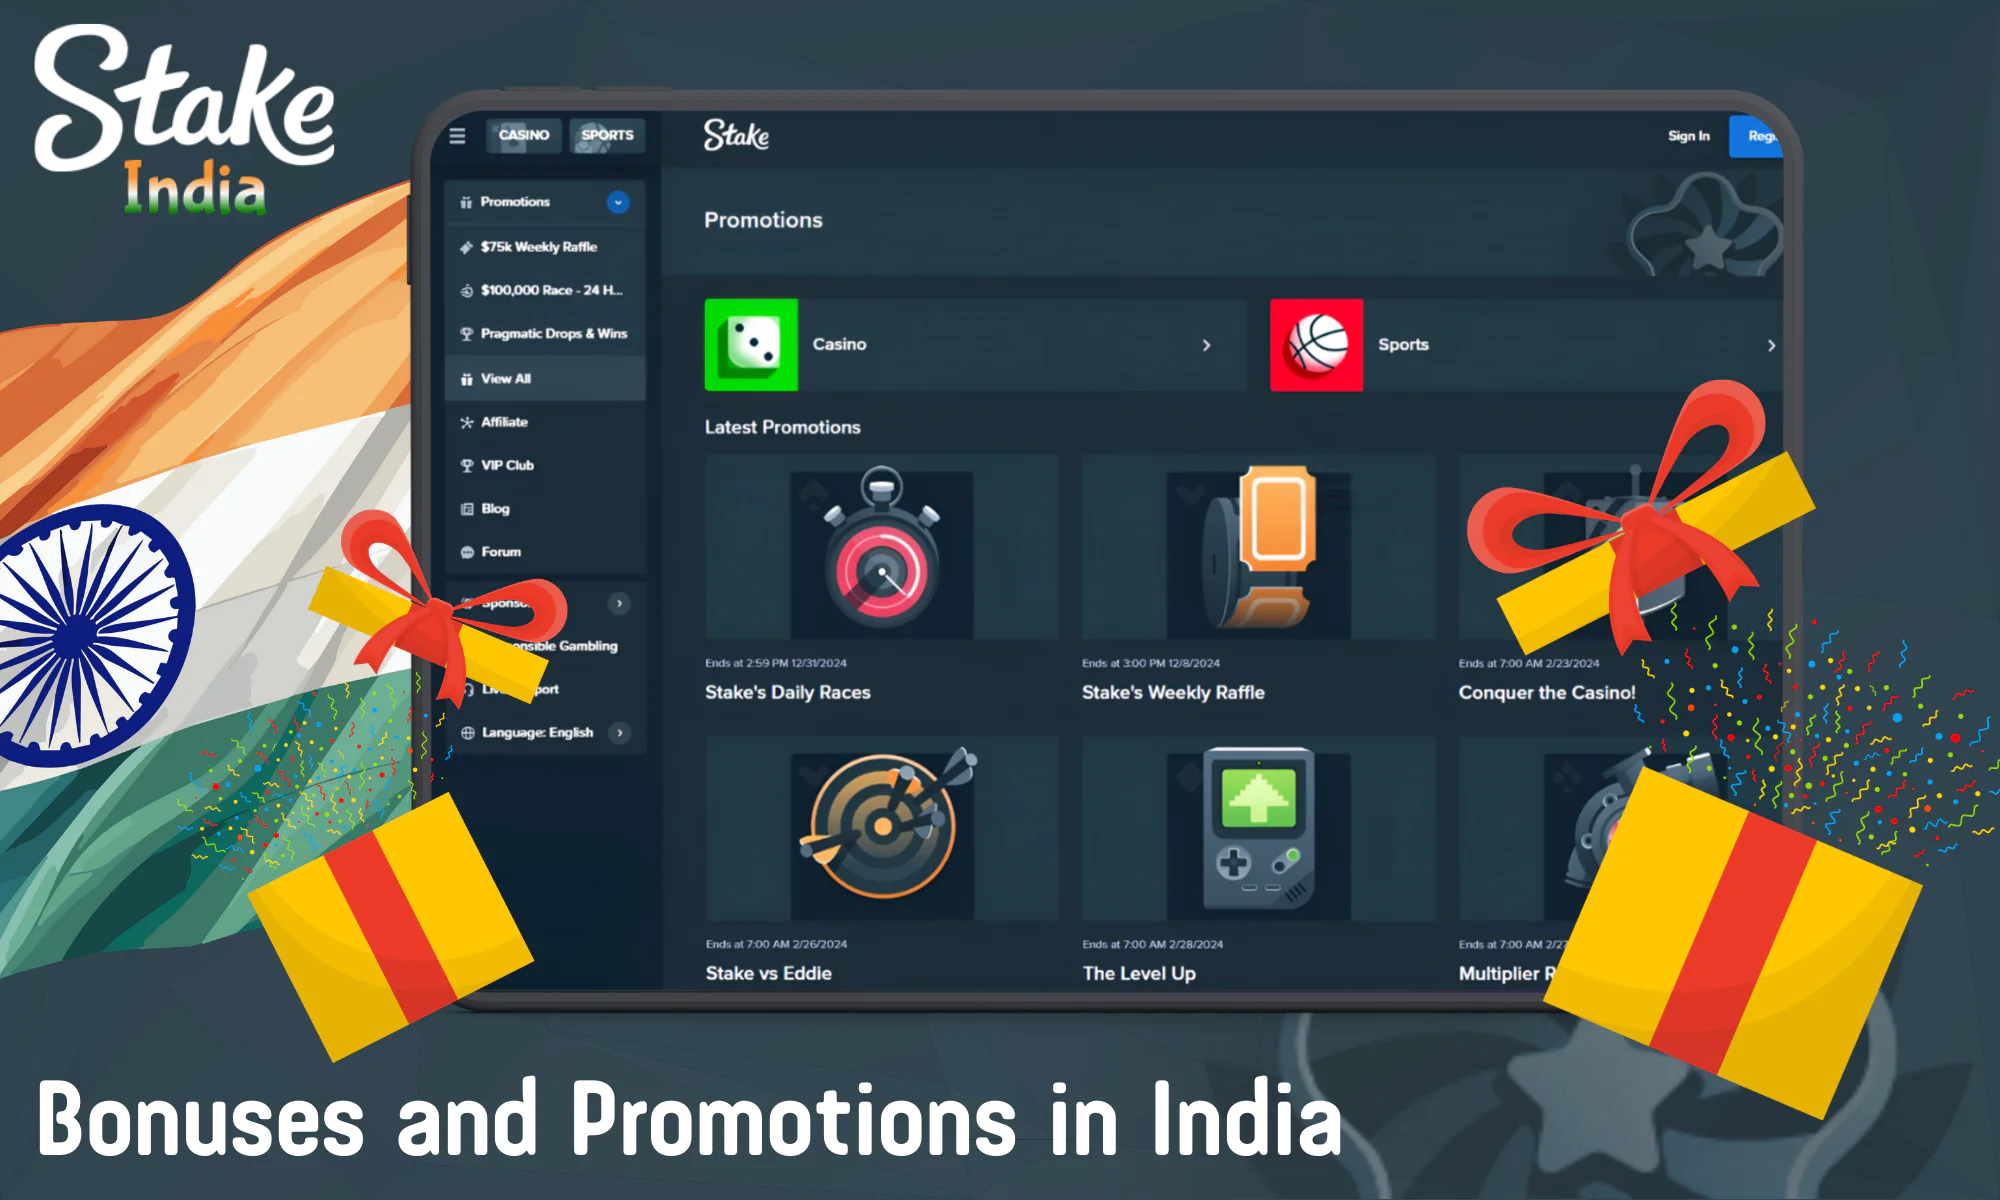 Stake in India has a special bonus program with many promotions and bonuses